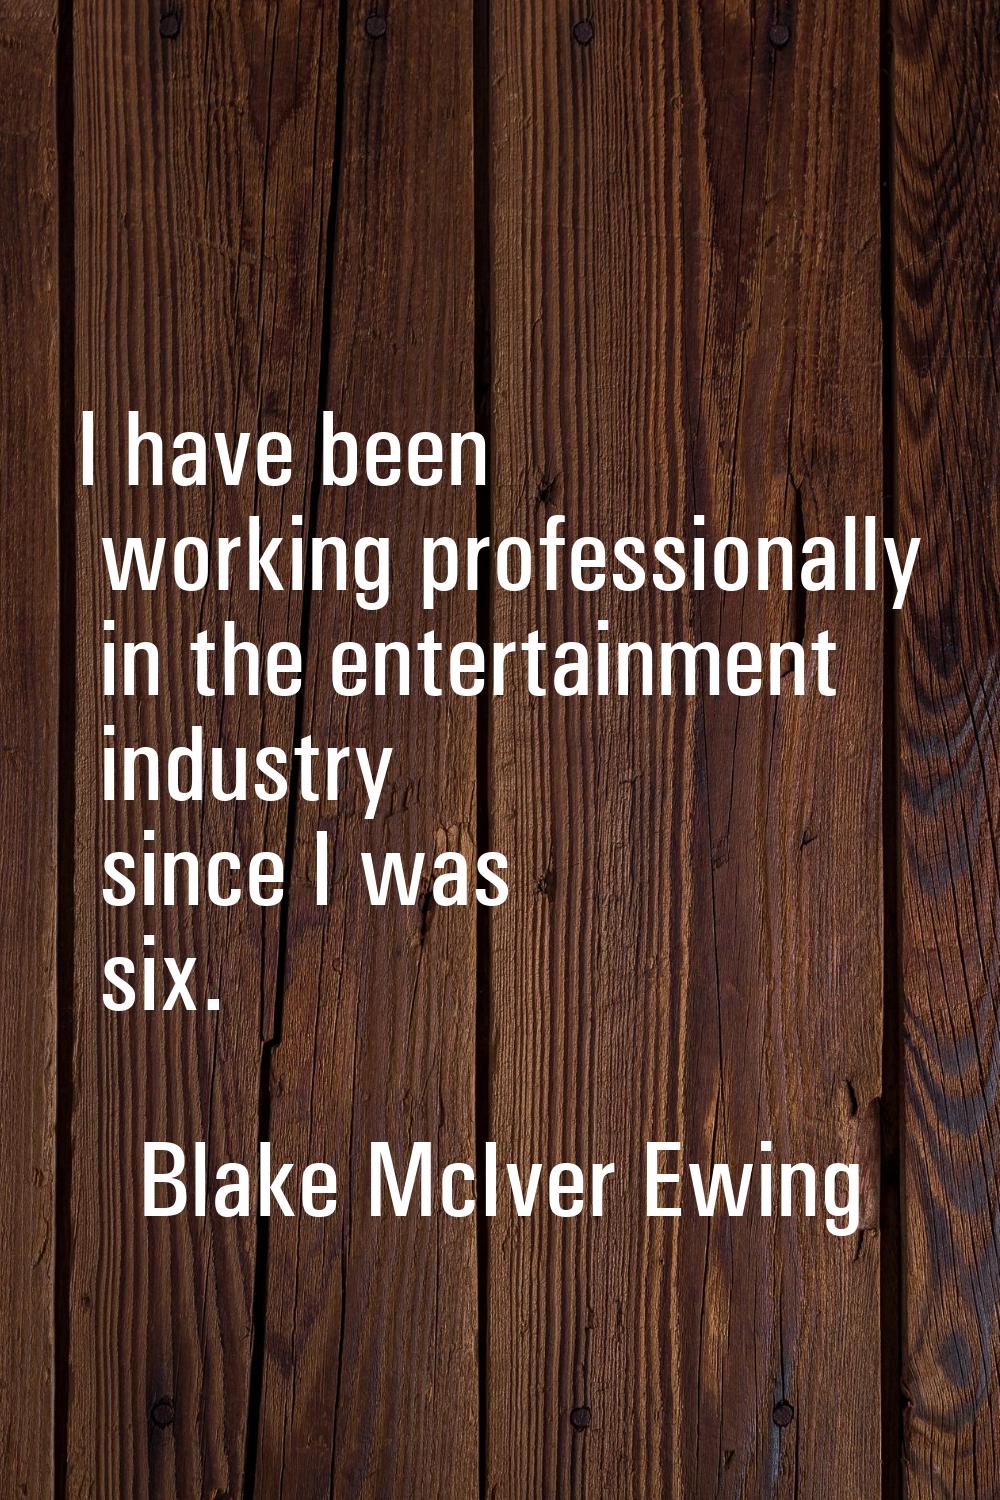 I have been working professionally in the entertainment industry since I was six.